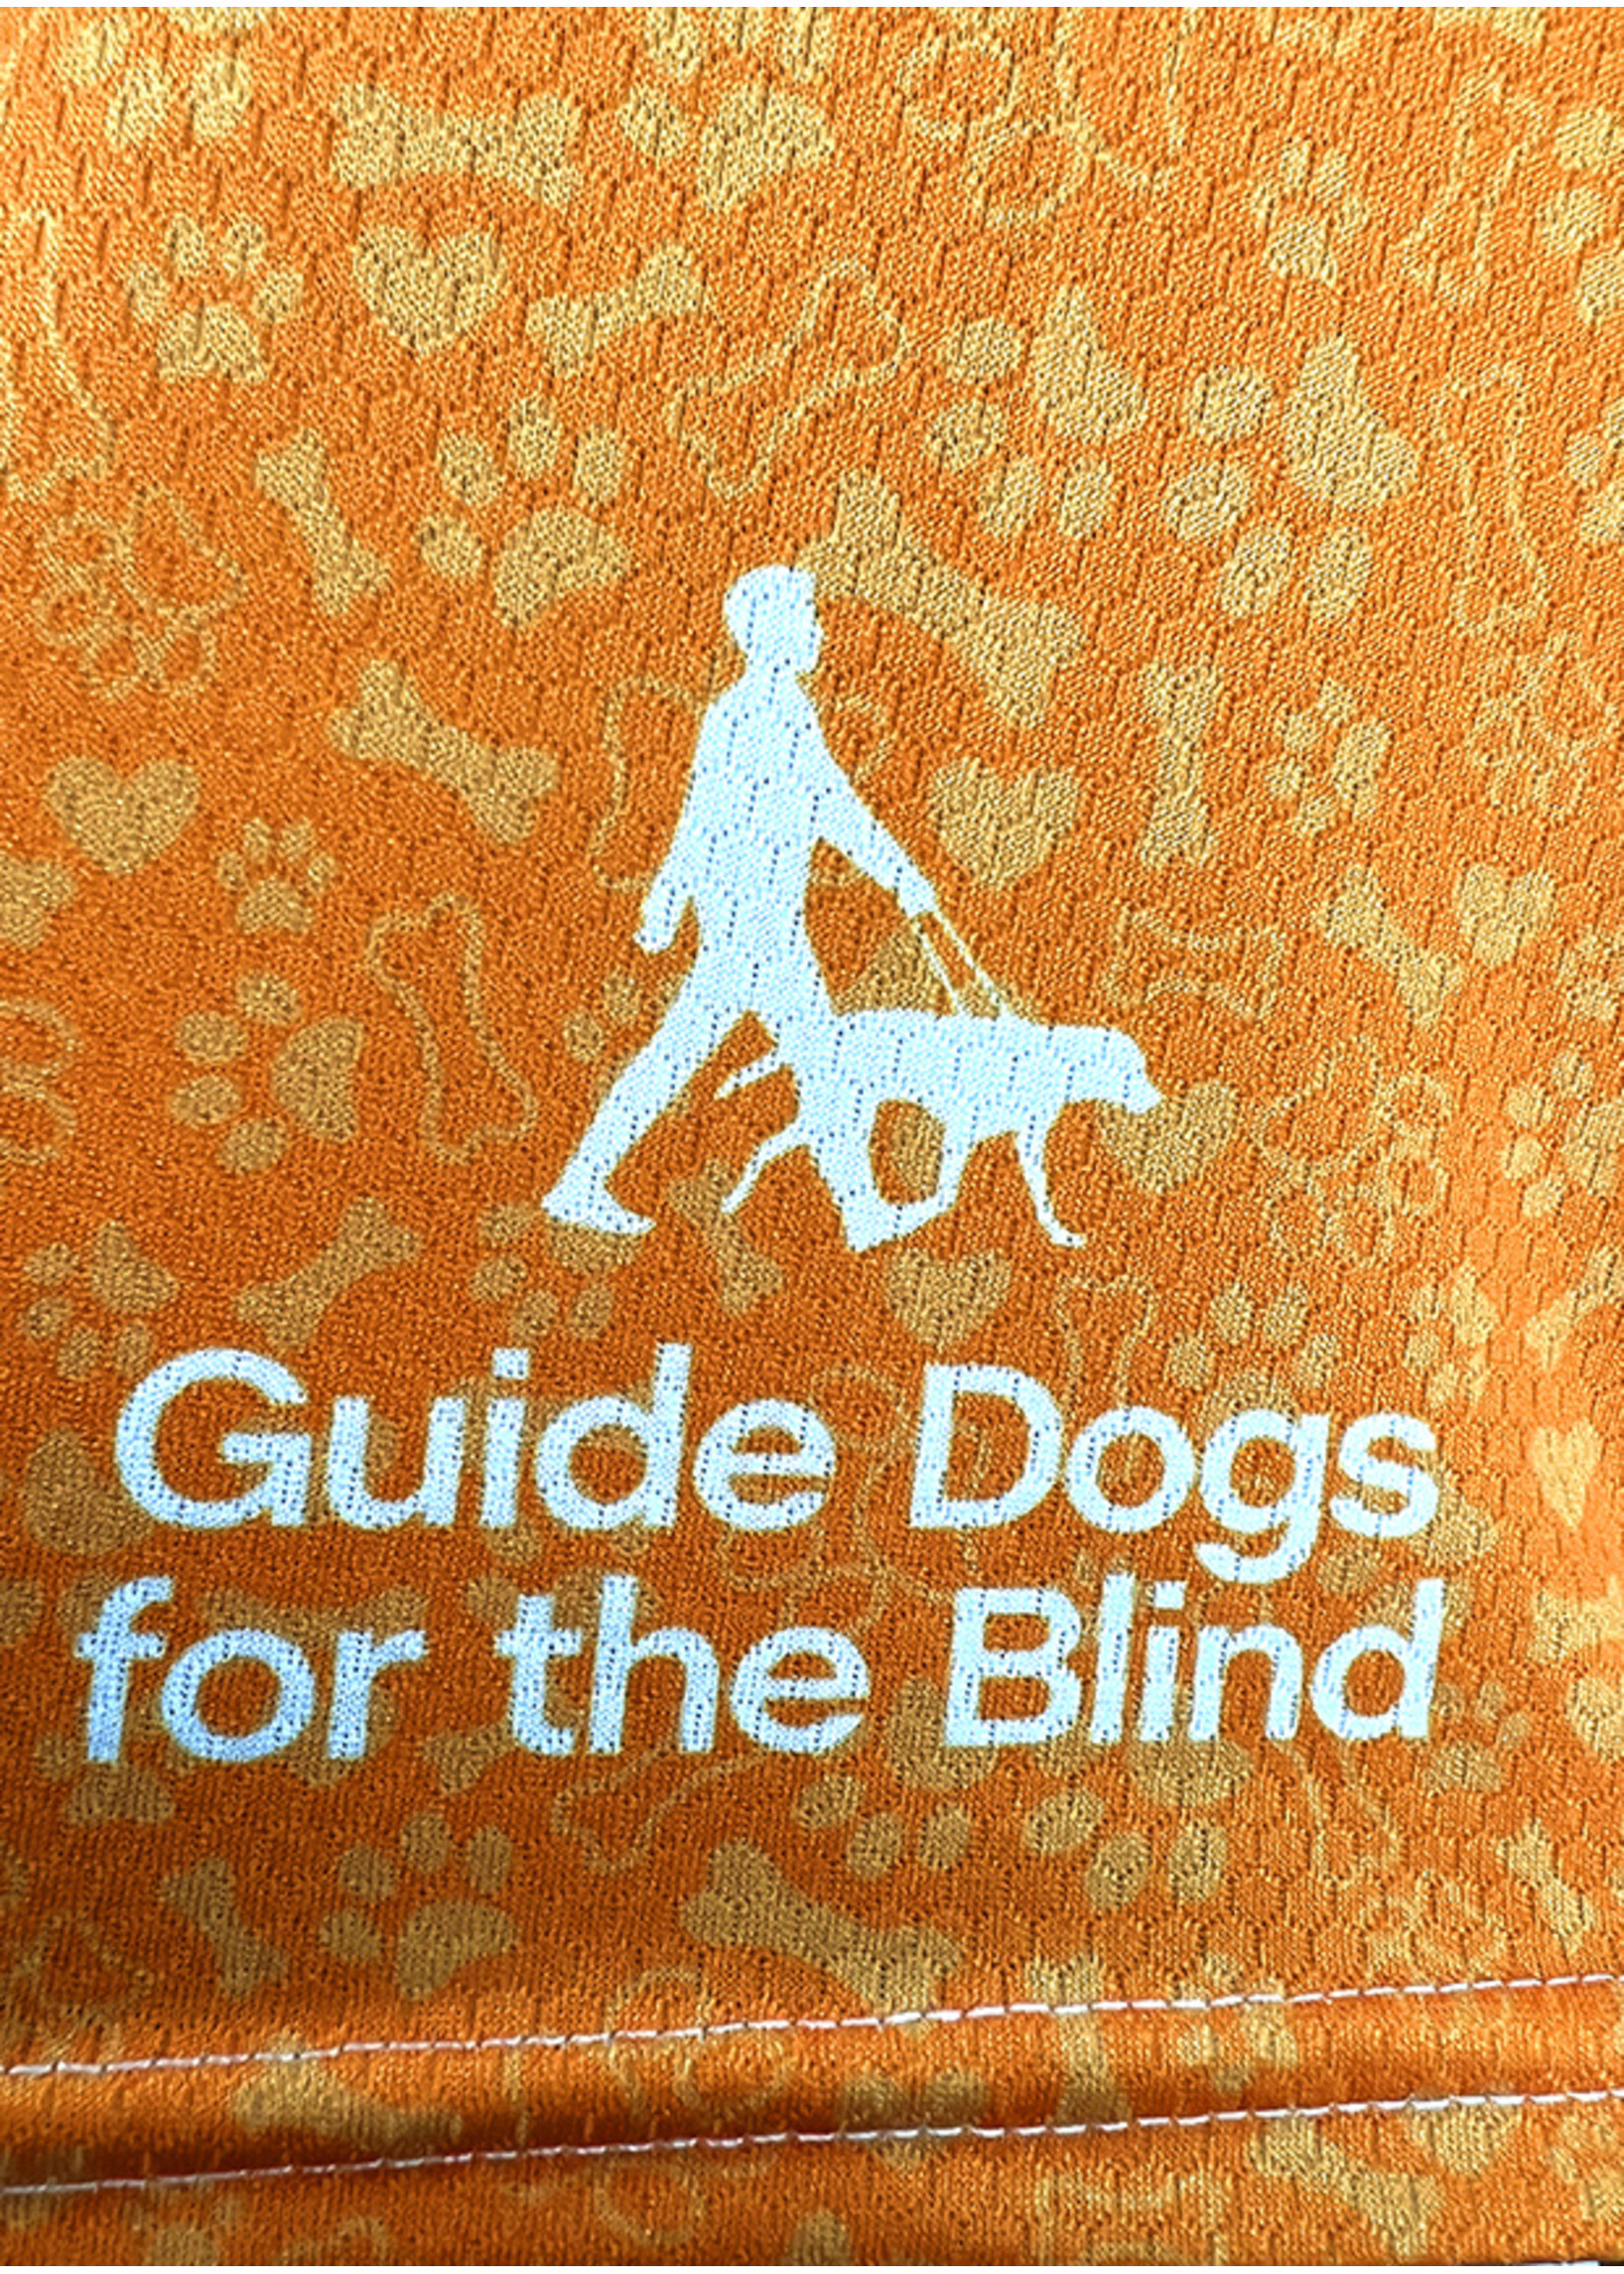 Cycle Jersey - Guide Dogs for the Blind